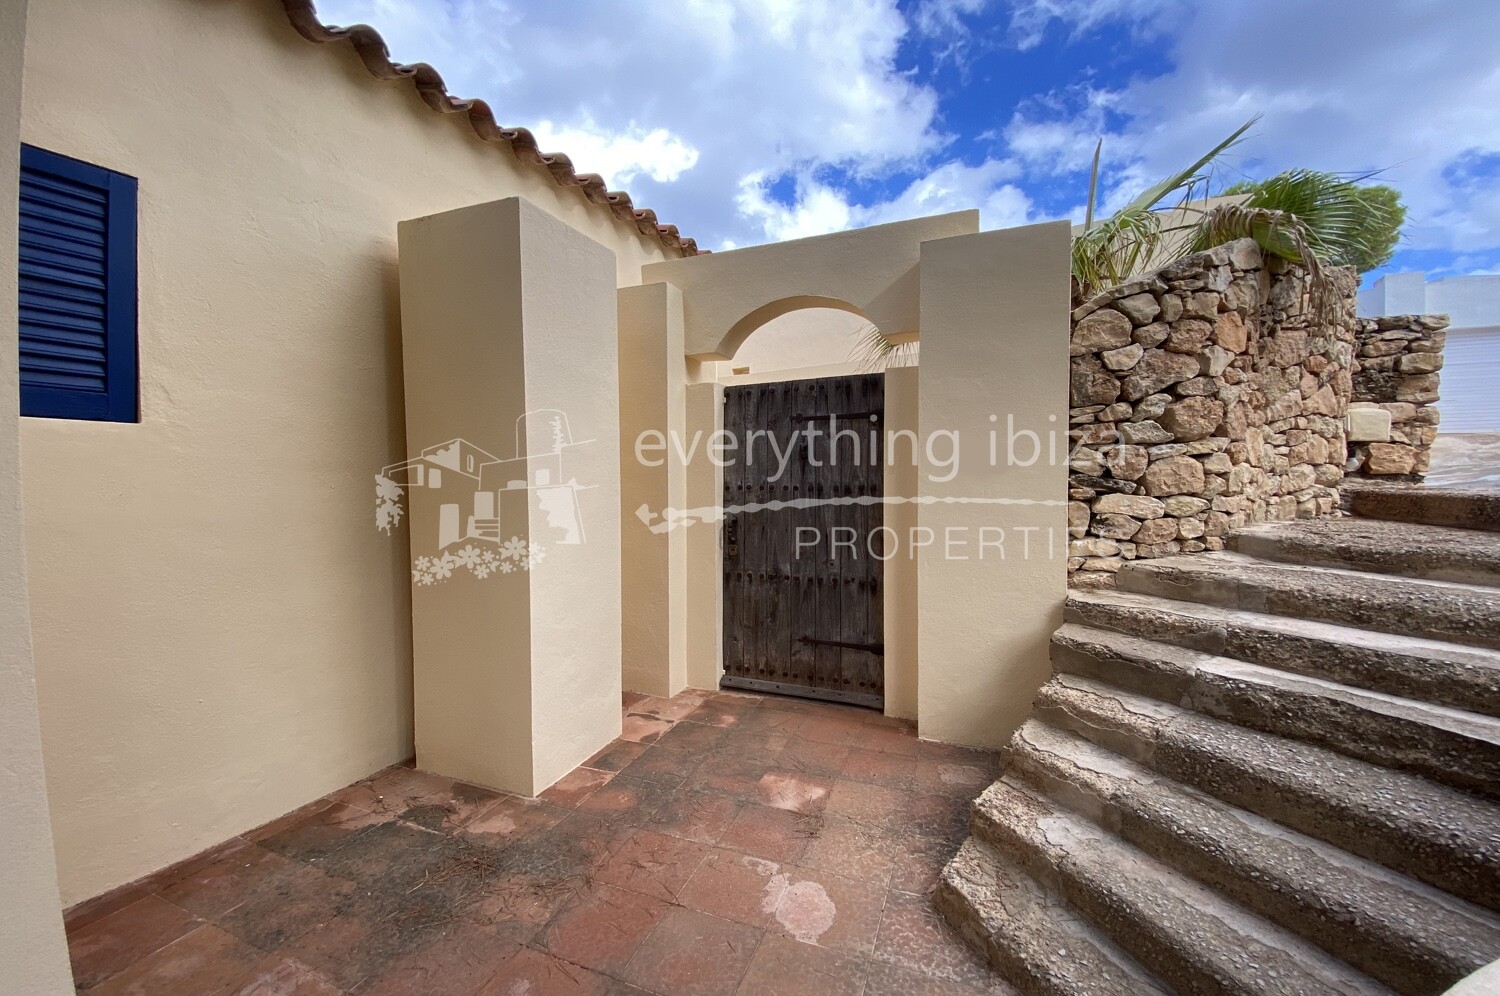 Charming Mediterranean Style Villa Composed of 3 Houses into 1, ref. 1487, for sale in Ibiza by everything ibiza Properties